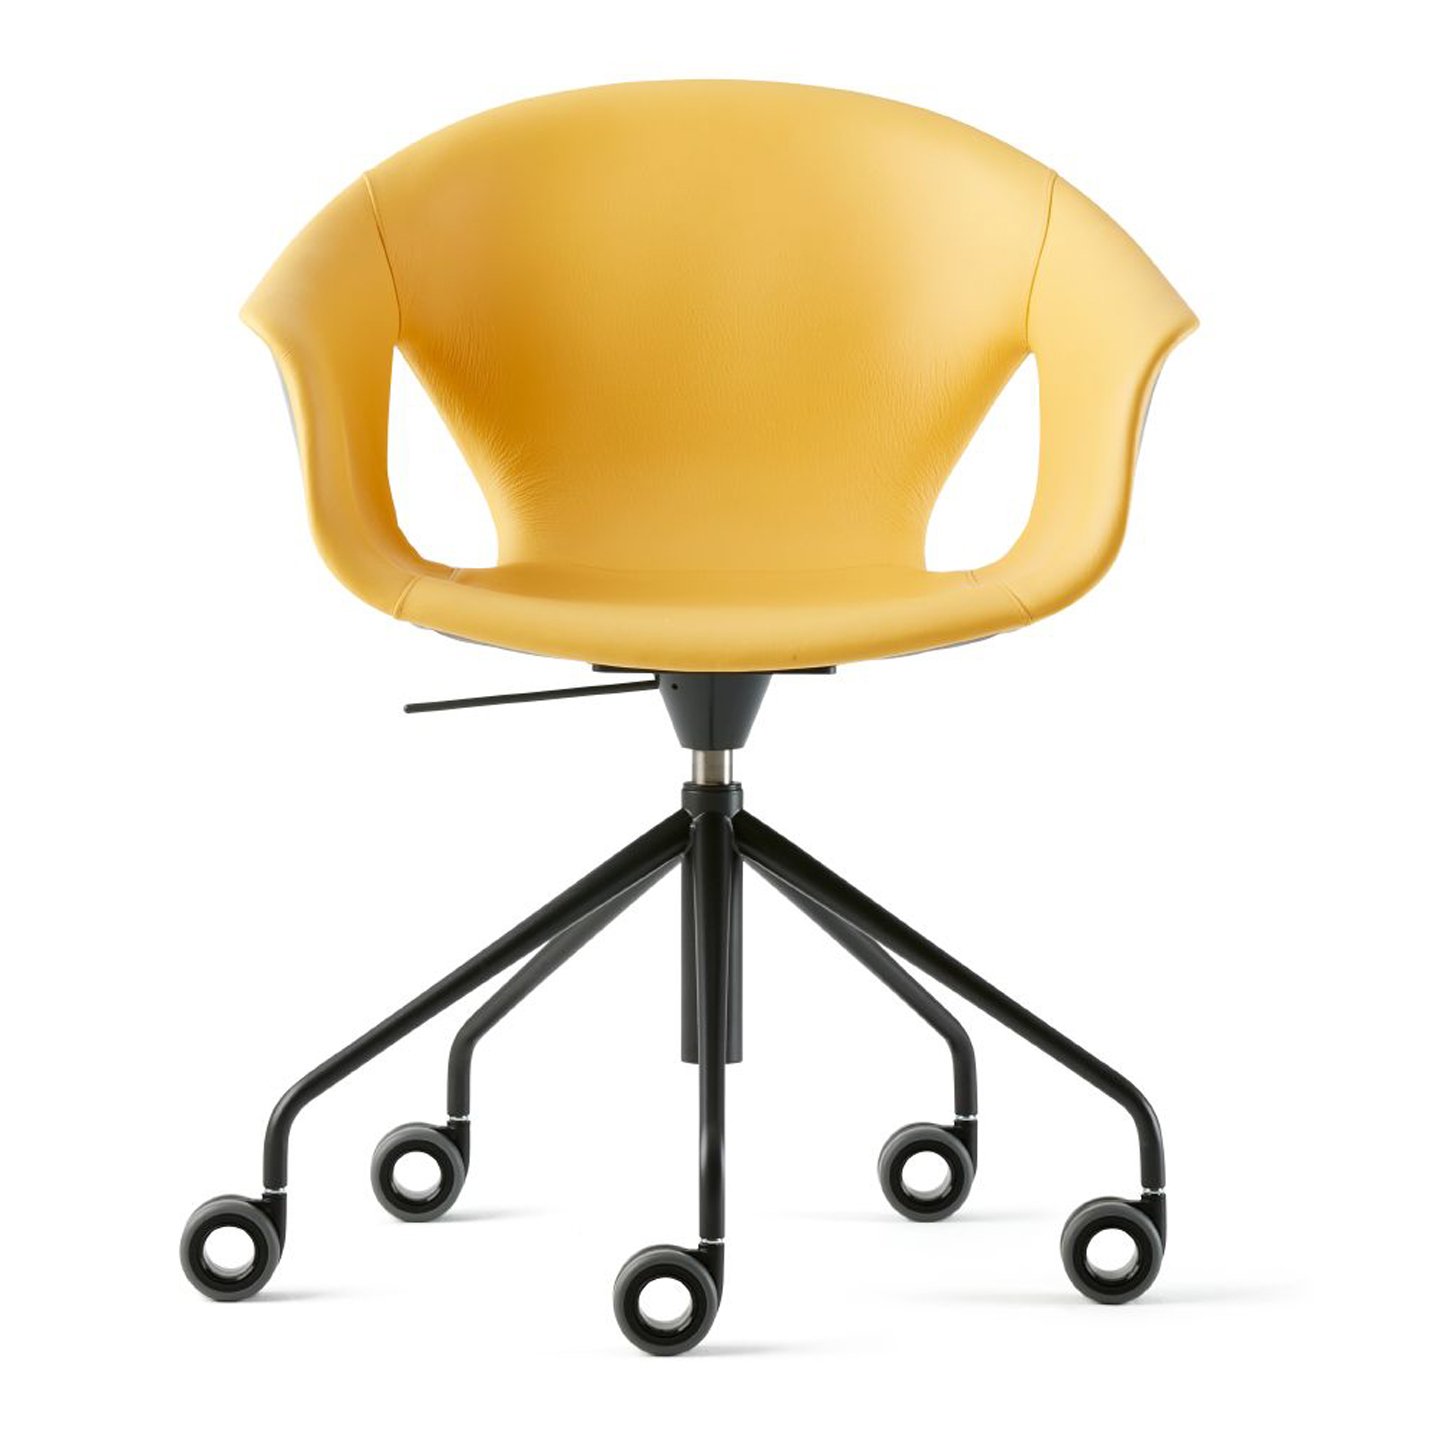 Haworth Ginger Ale chair in mustard leather upholstery and black exterior with wheels in a front view